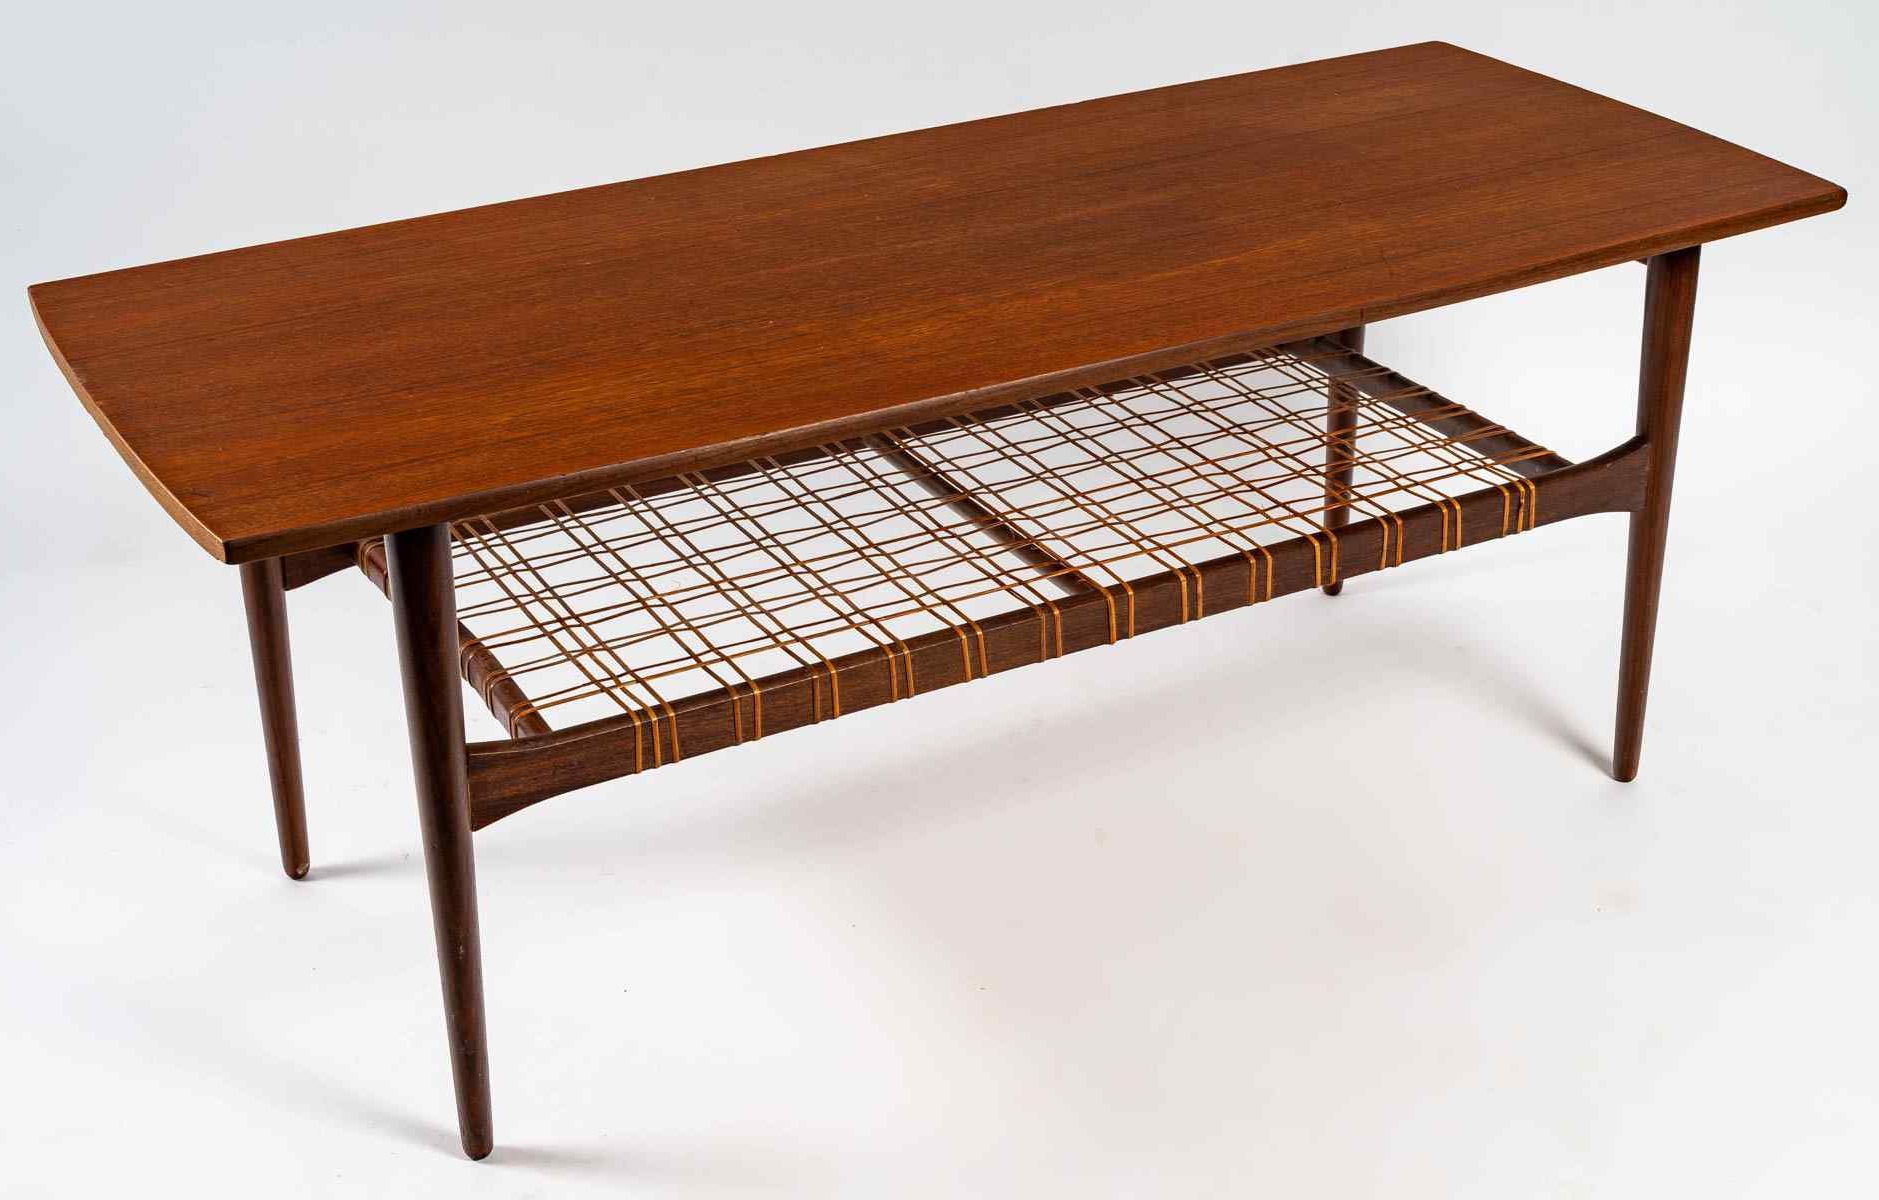 : Anticswiss Intended For Well Known Teak Coffee Tables (View 2 of 20)